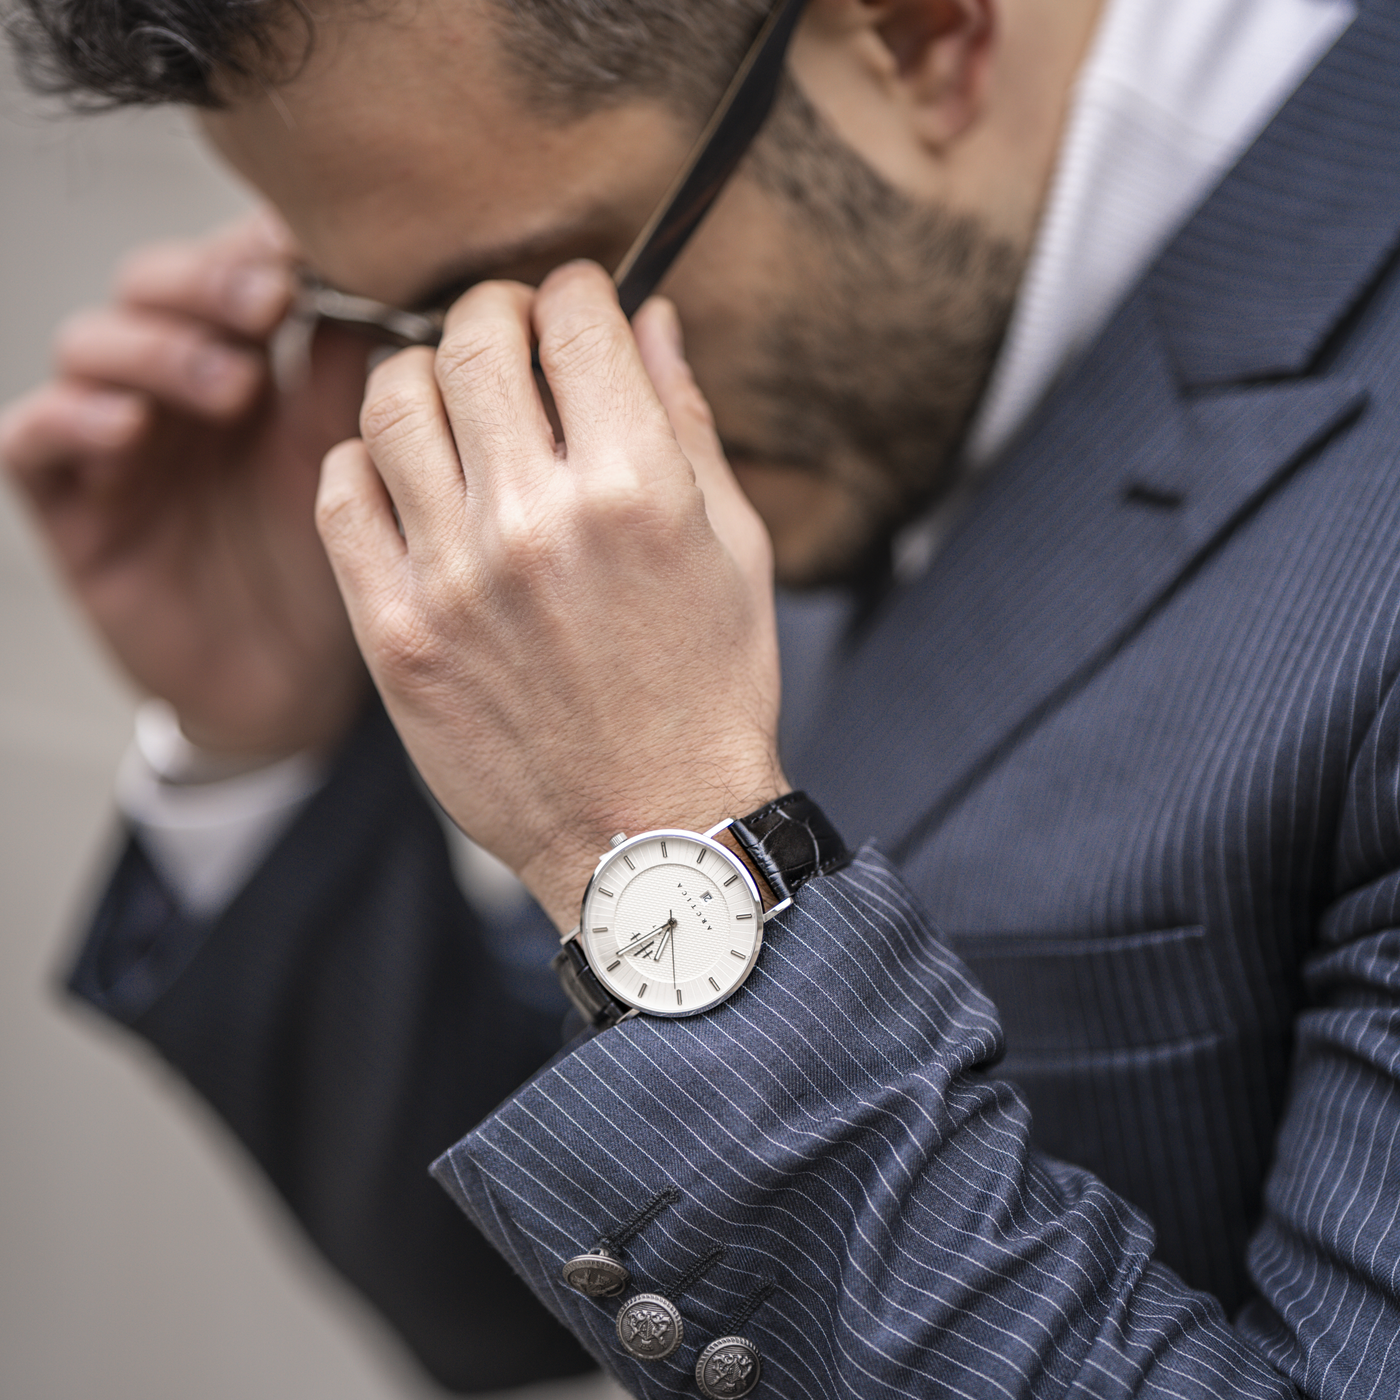 Man with blue suit wearing black and white THT watch.